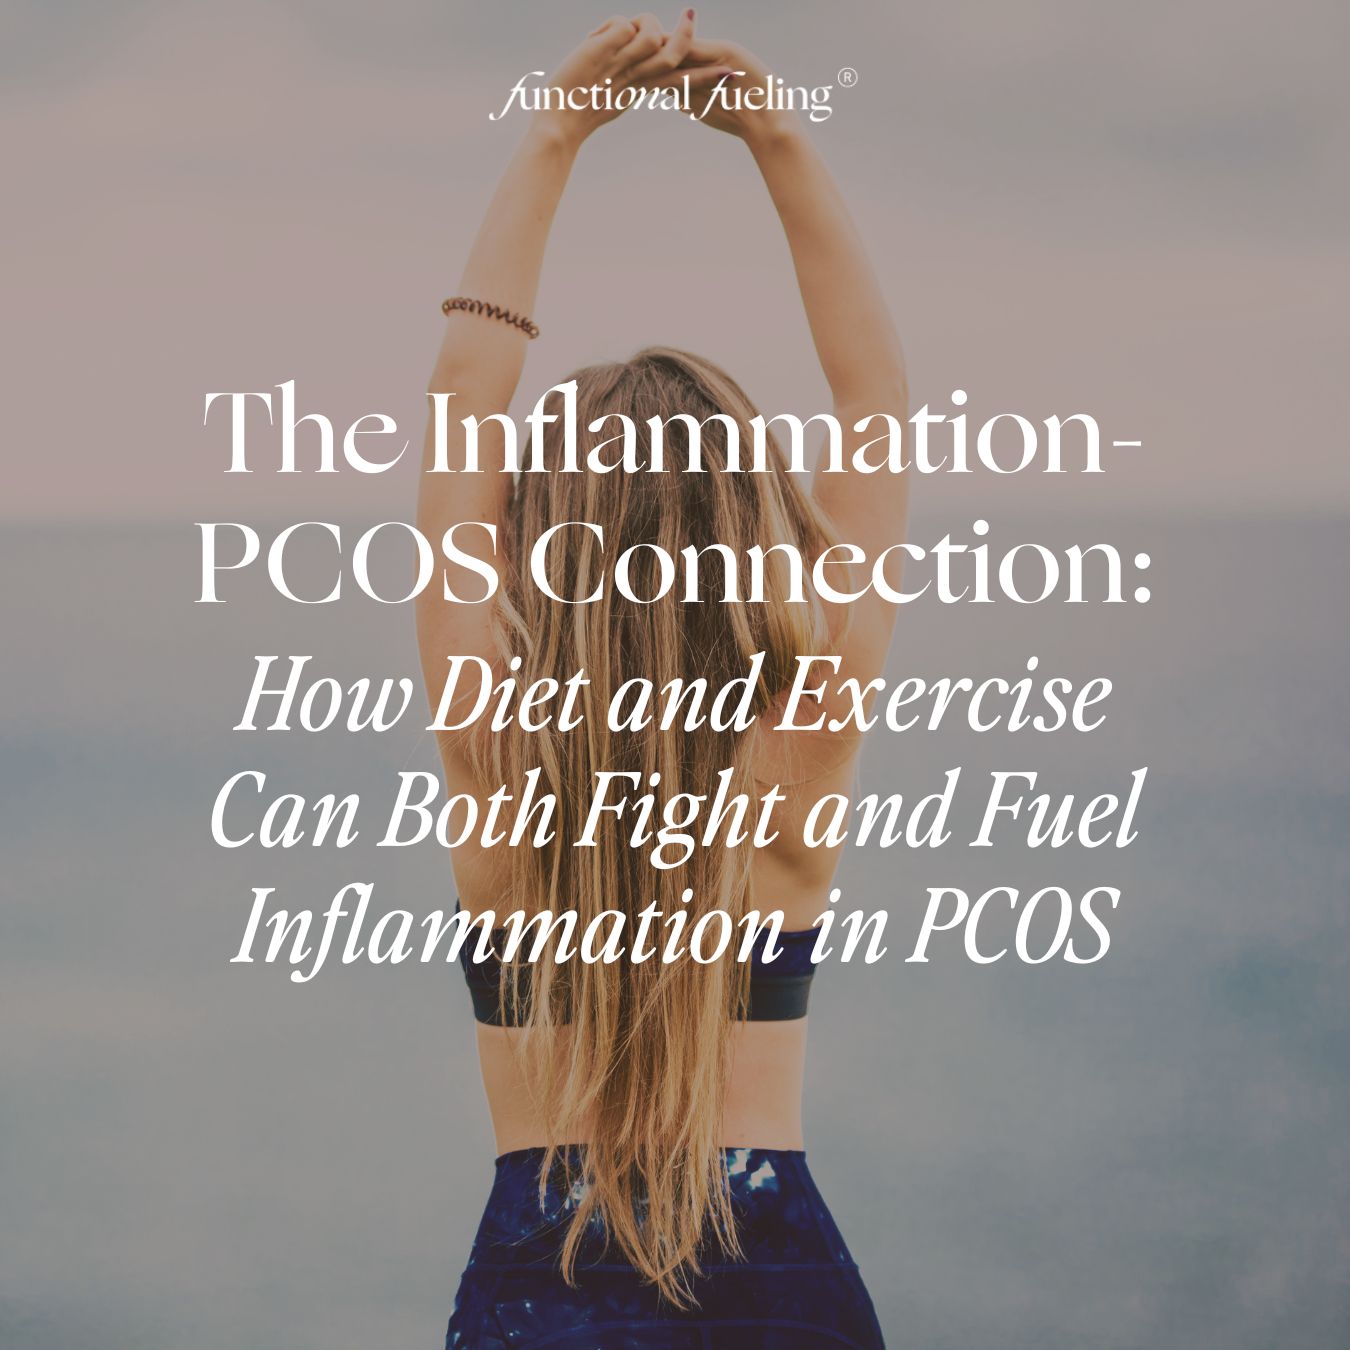 Inflammation-PCOS Connection